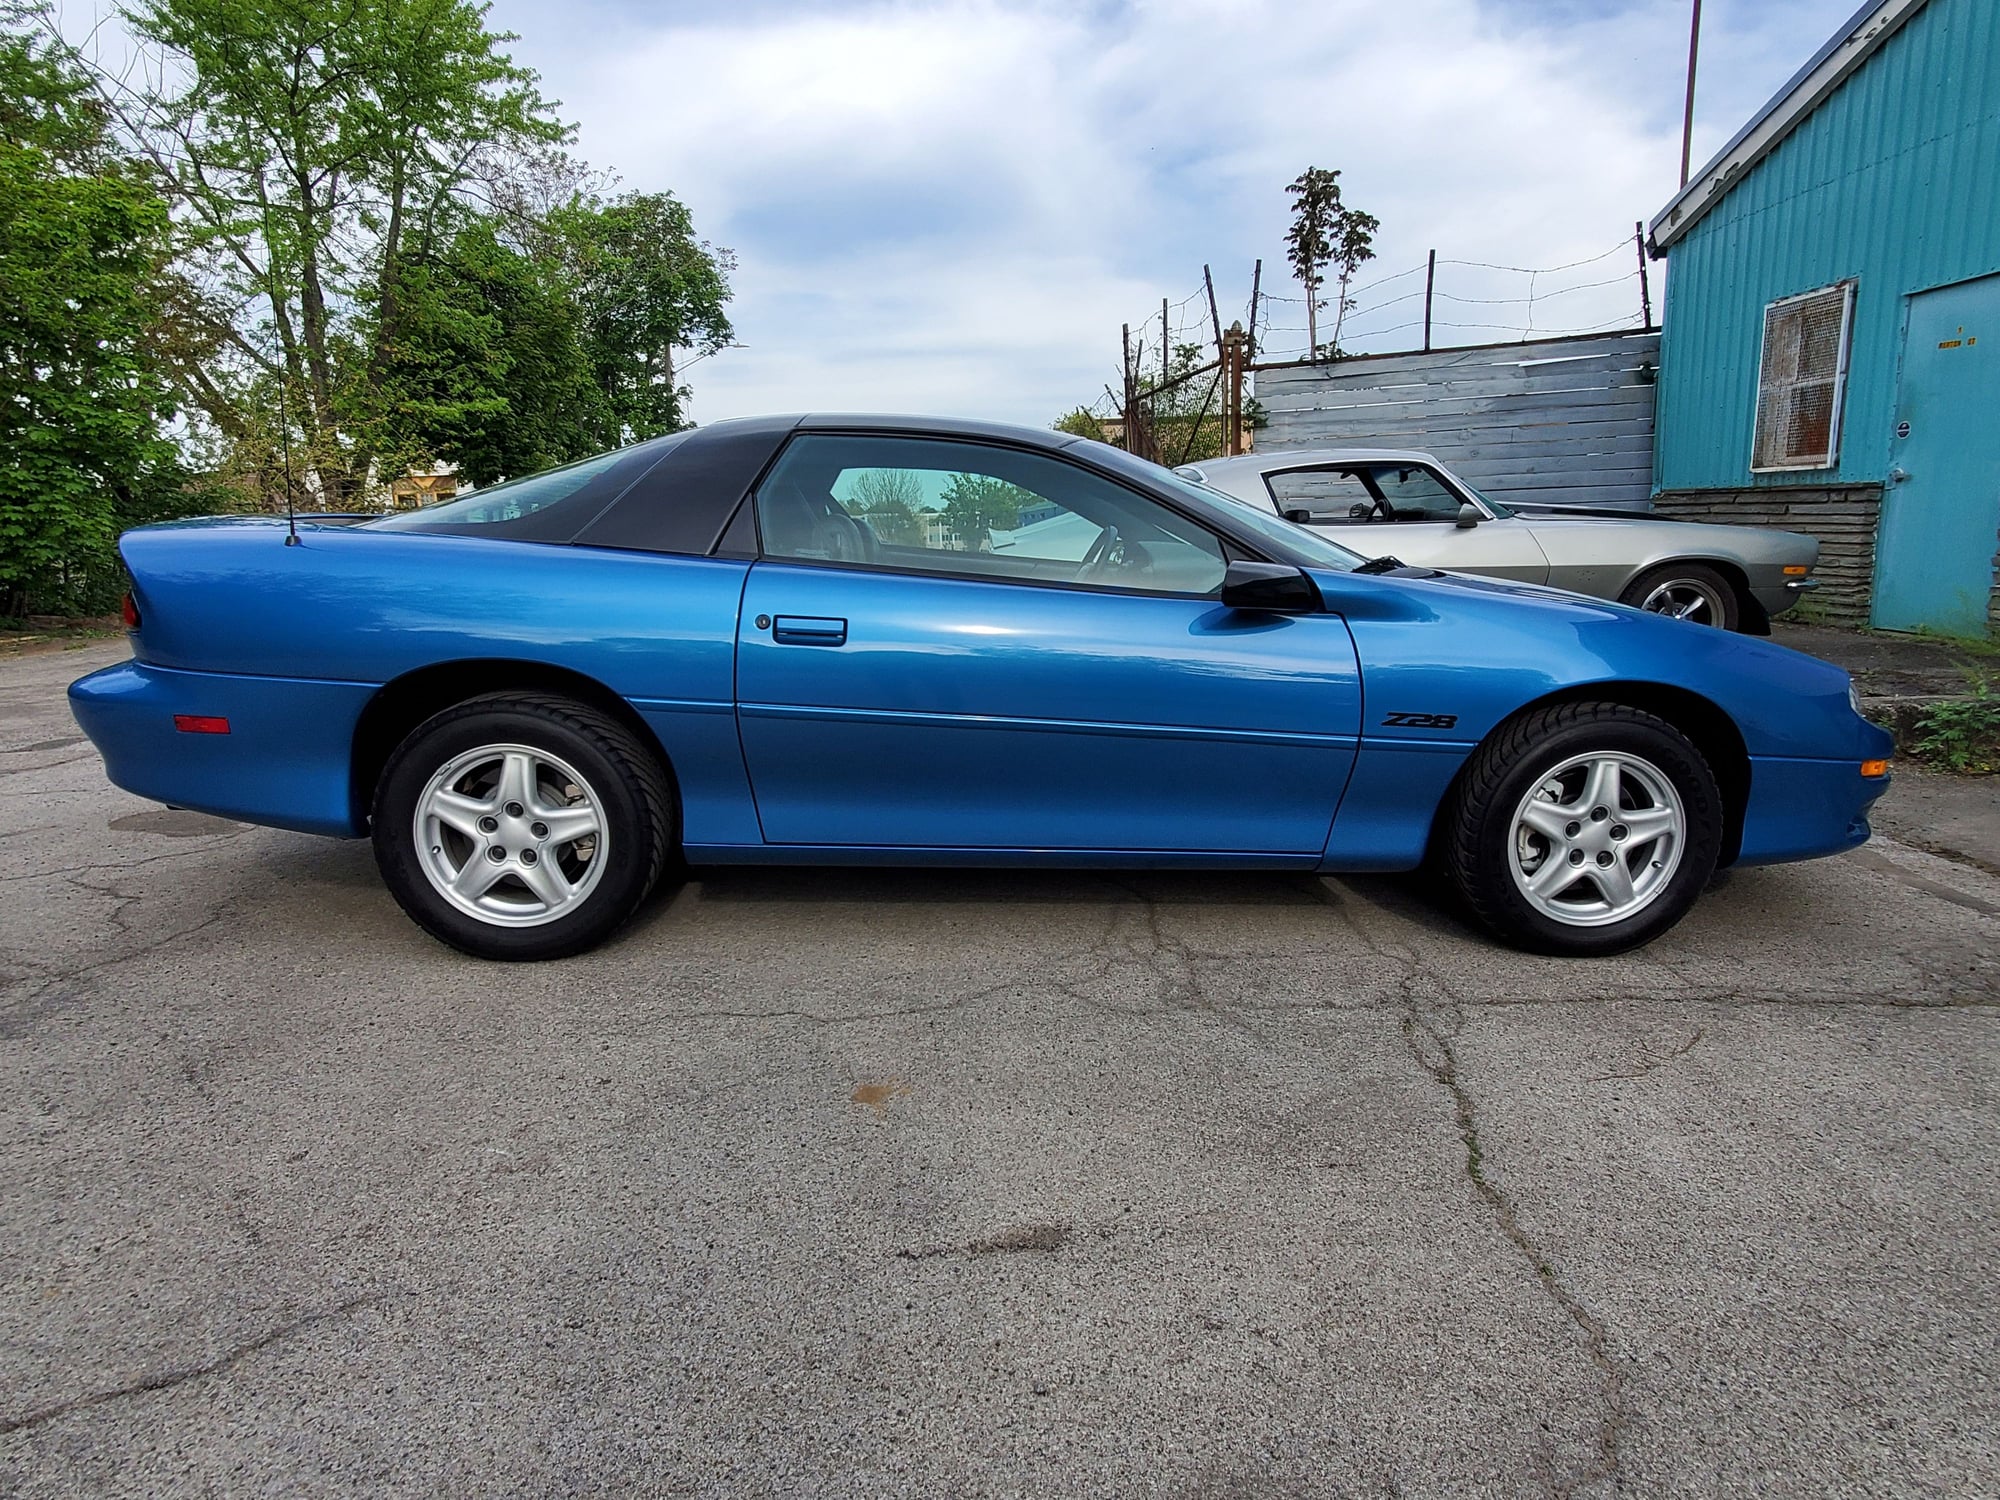 1999 Chevrolet Camaro - 1999 Camaro Z28 Hardtop 6 speed, only 2040 miles on it. - New - VIN 2G1FP22G5X2137514 - 2,040 Miles - 8 cyl - 2WD - Manual - Coupe - Blue - Webster, NY 14580, United States